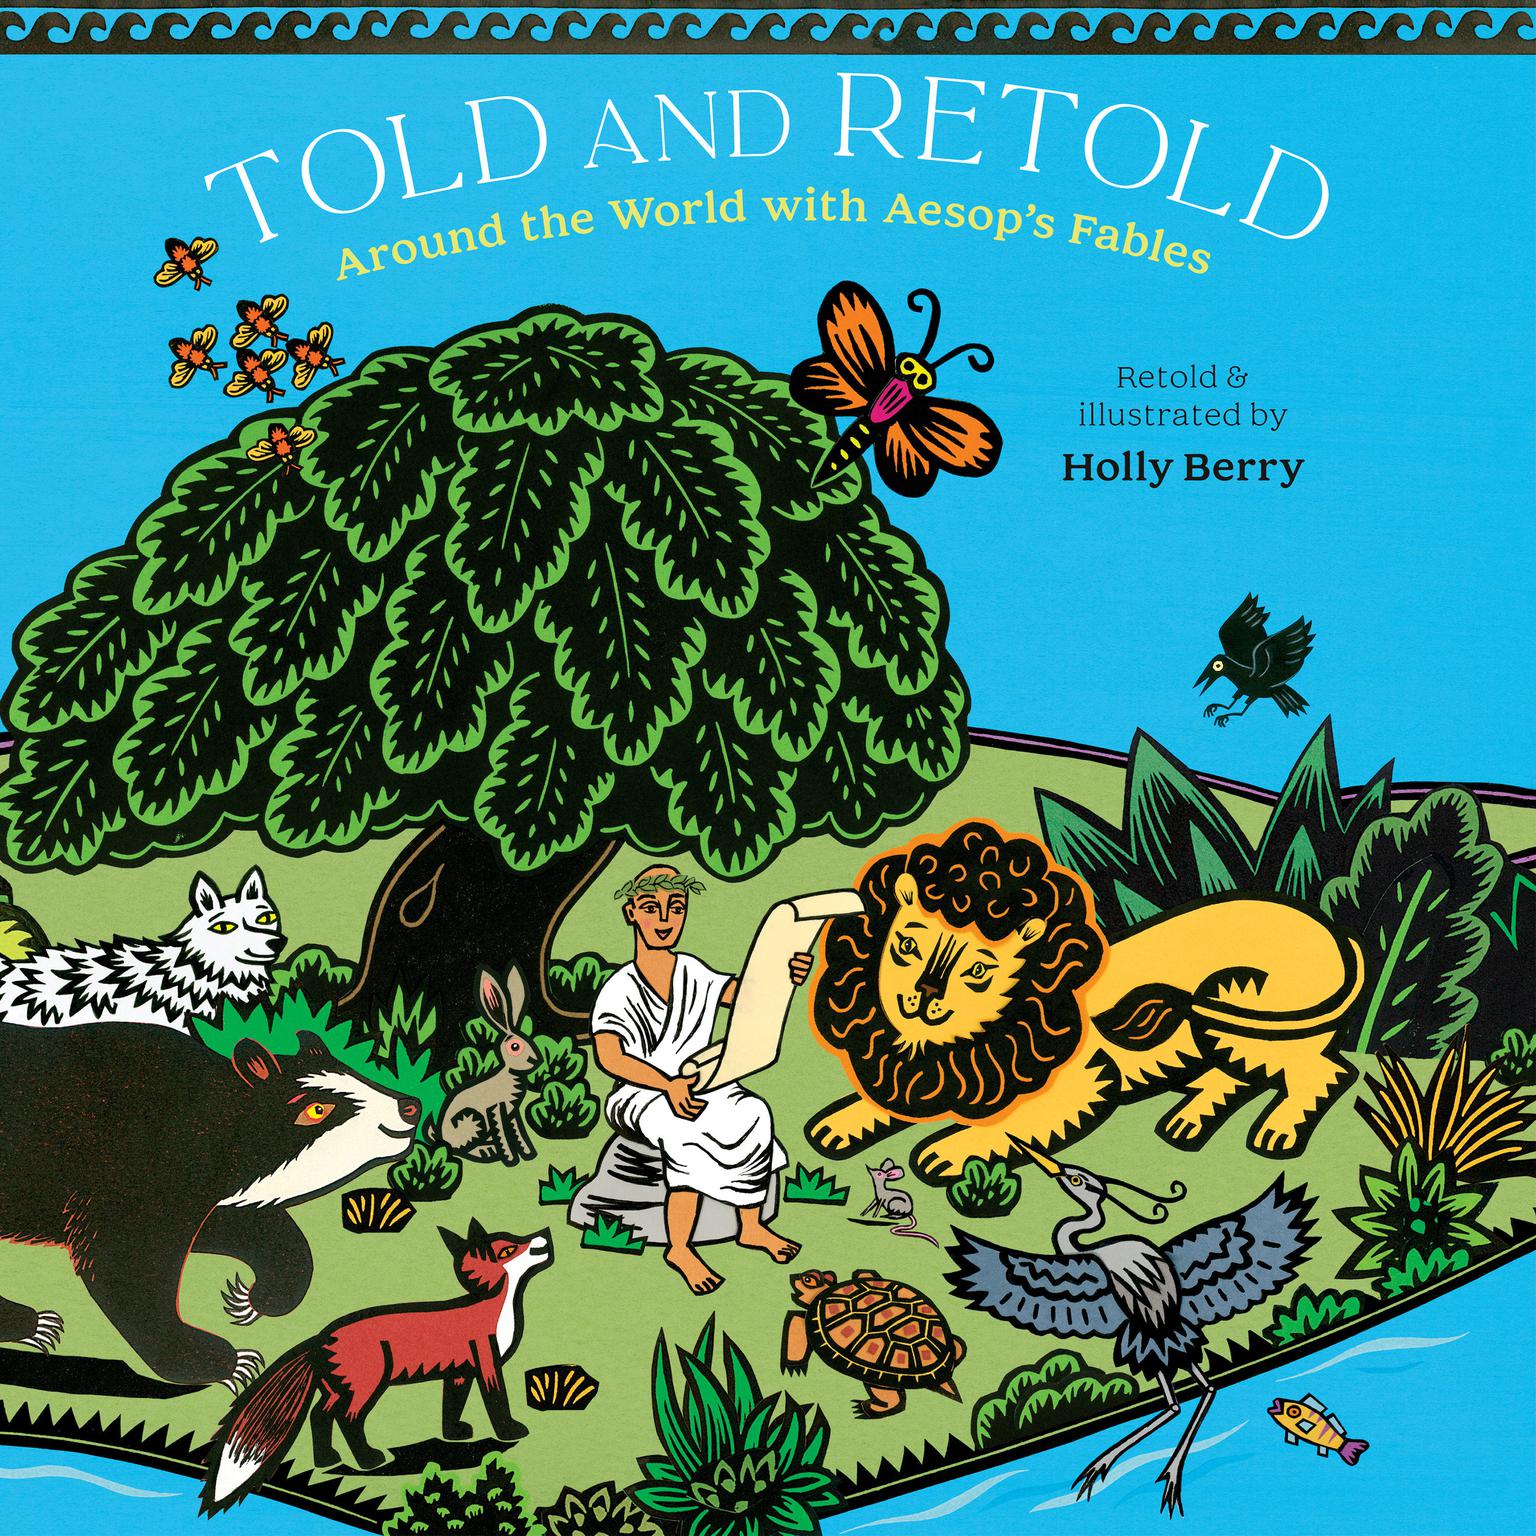 Told and Retold: Around the World with Aesops Fables Audiobook, by Holly Berry